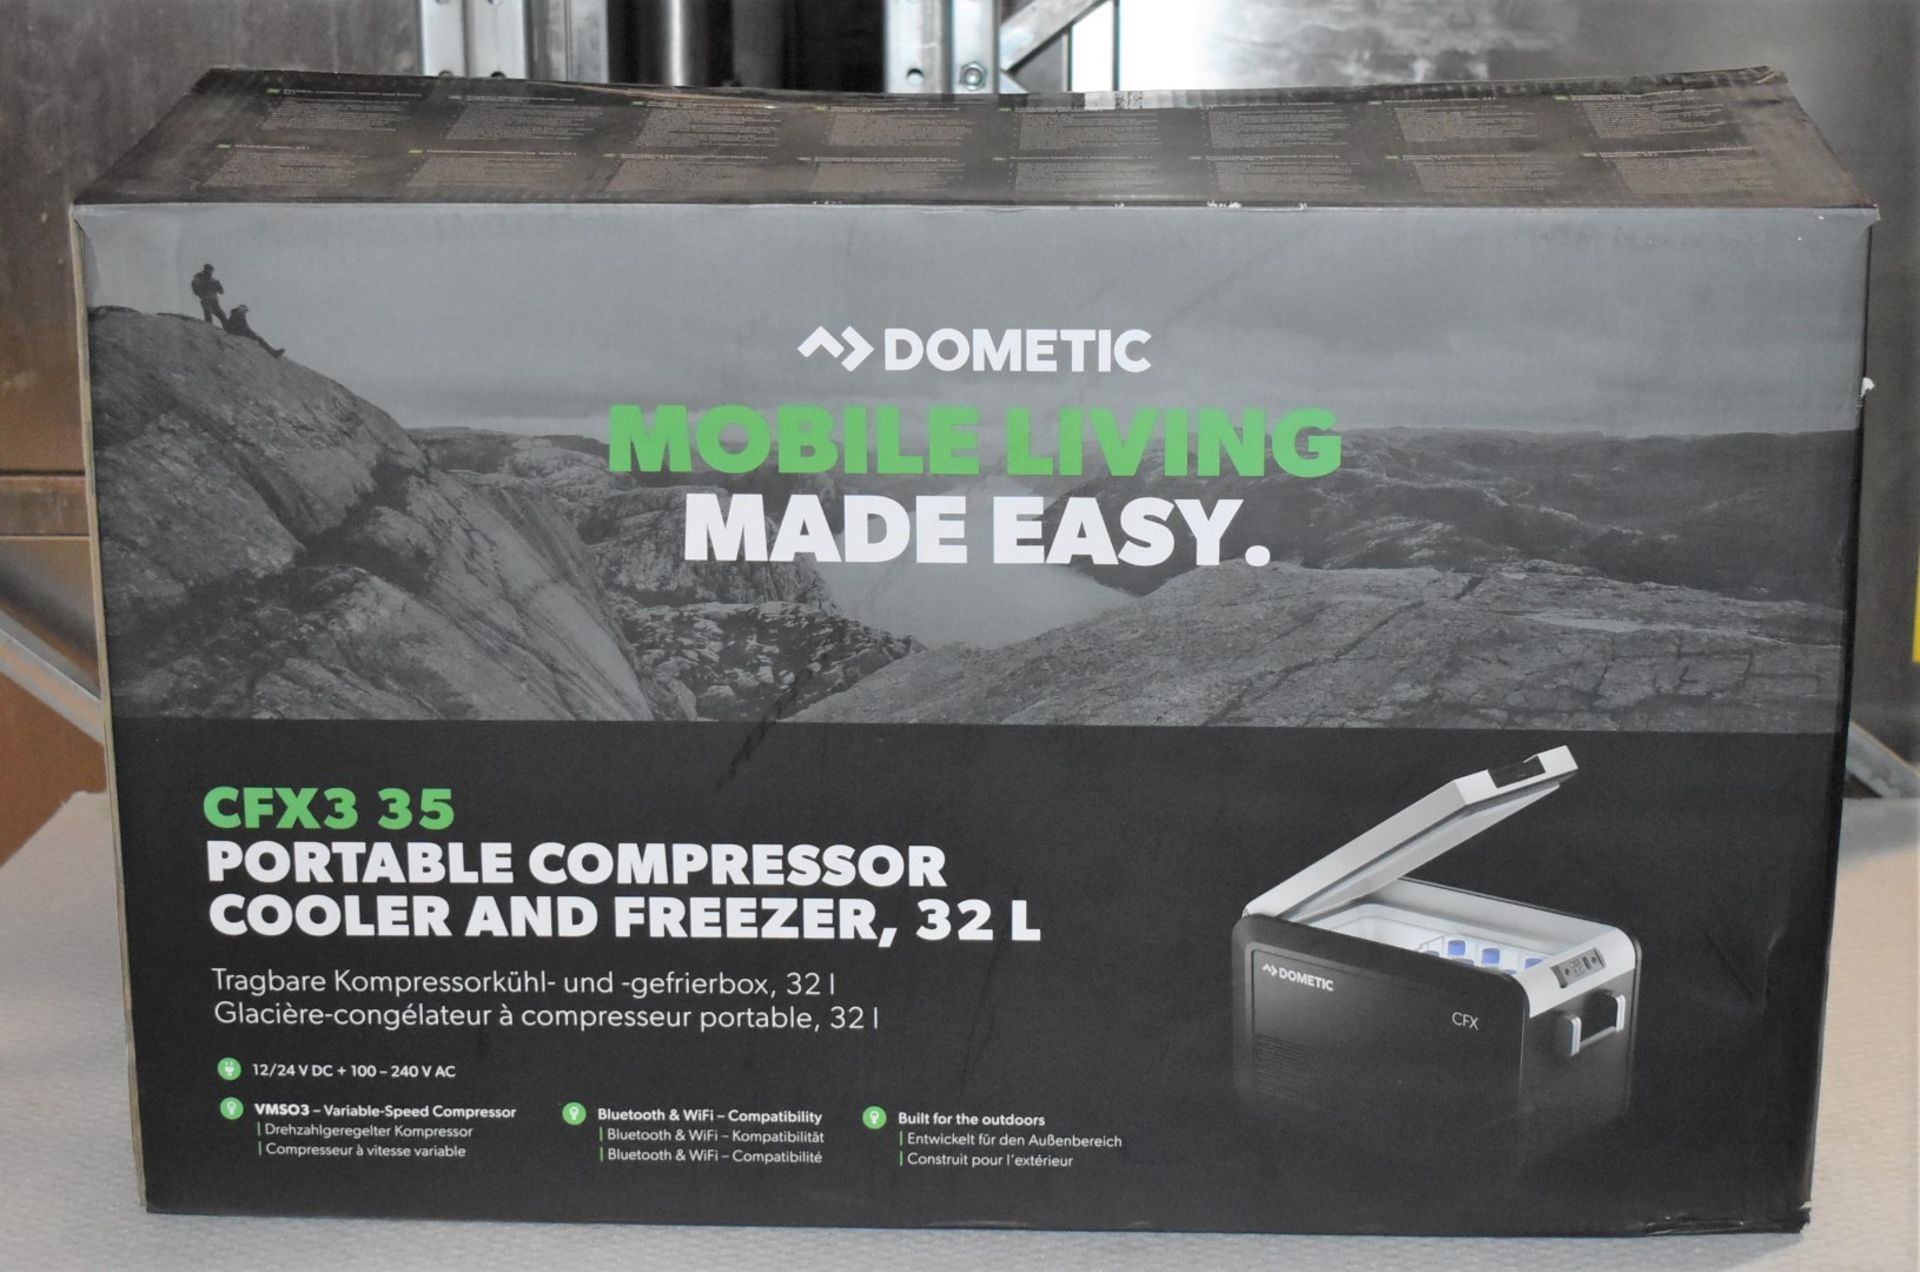 1 x Dometic CFX3 35 Portable Compressor Cooler / Freezer - For Camping, Motorhomes, Parties RRP £916 - Image 3 of 9